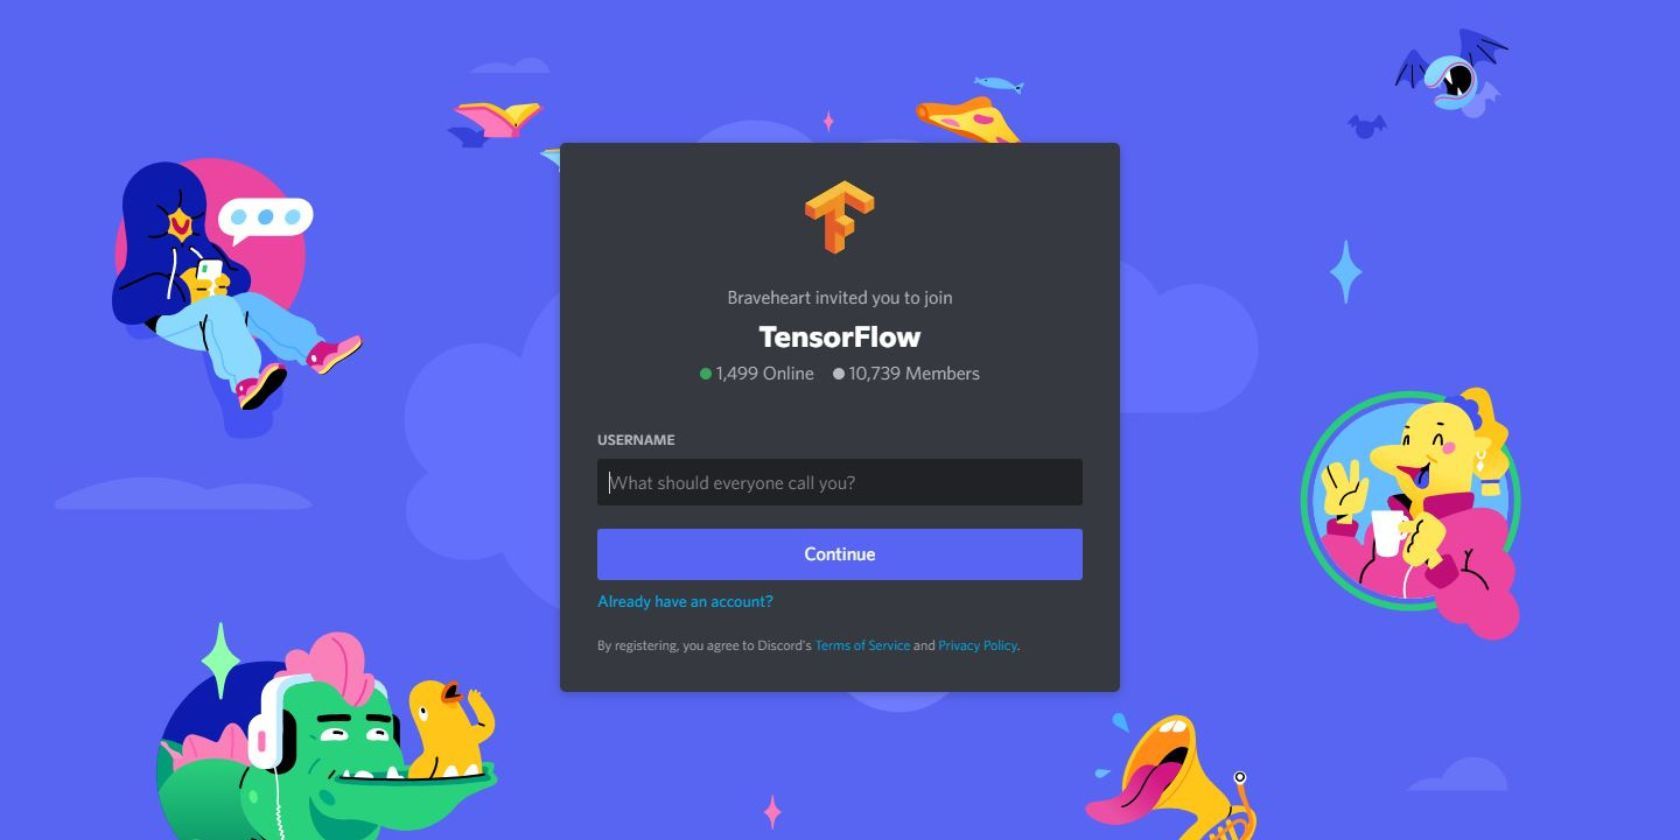 A screenshot of TensorFlow's invite page